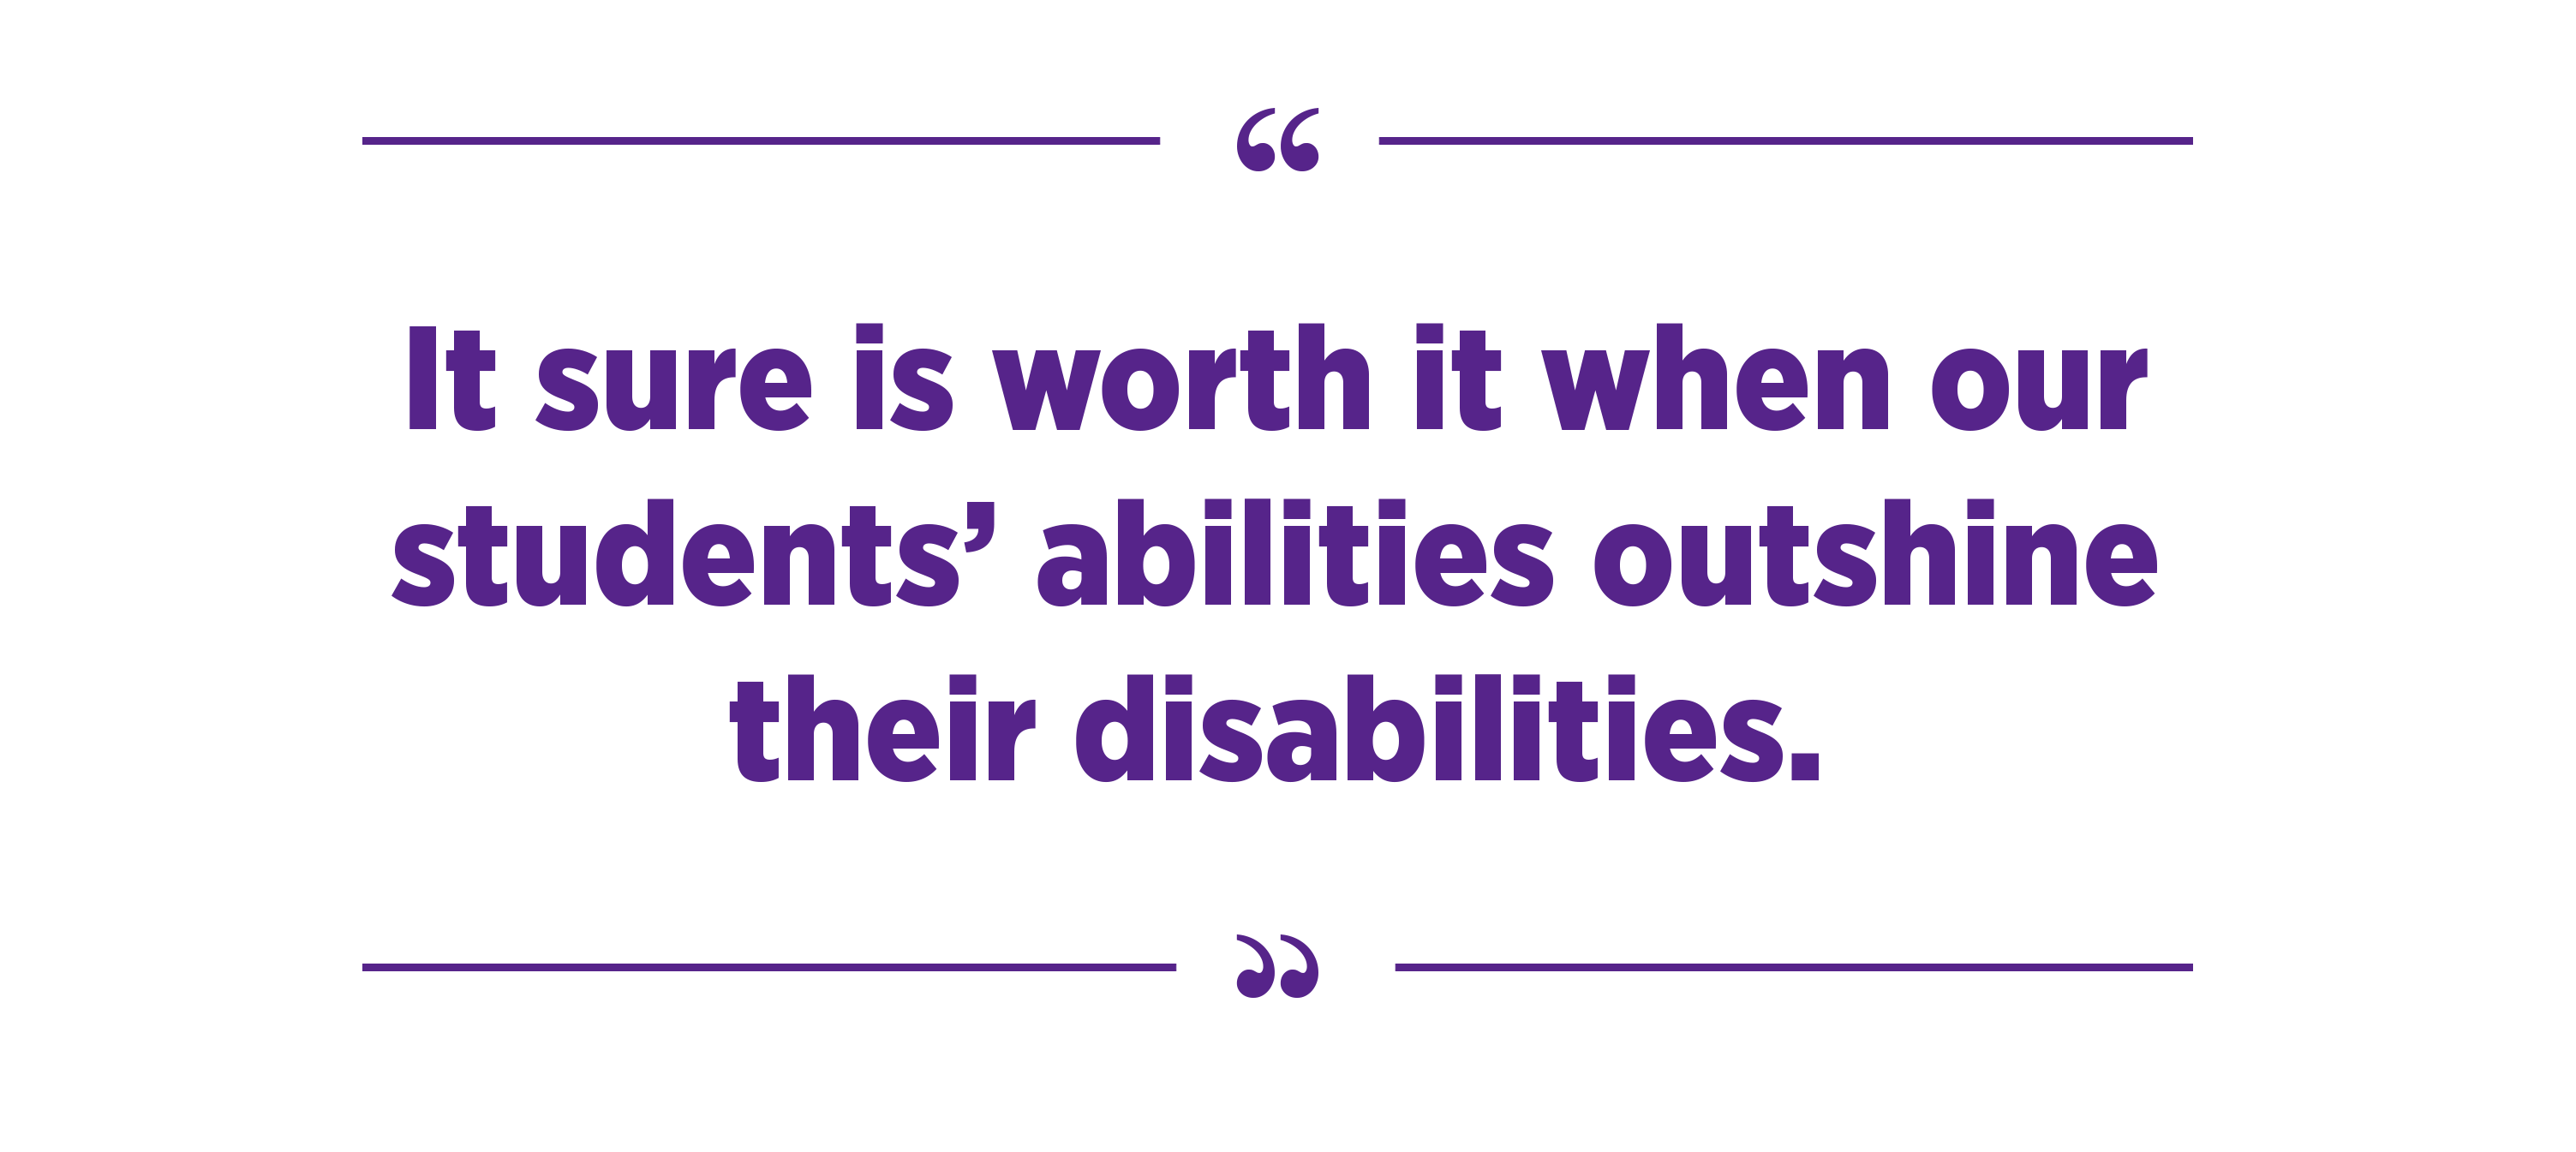 "It sure is worth it when our students’ abilities outshine their disabilities."